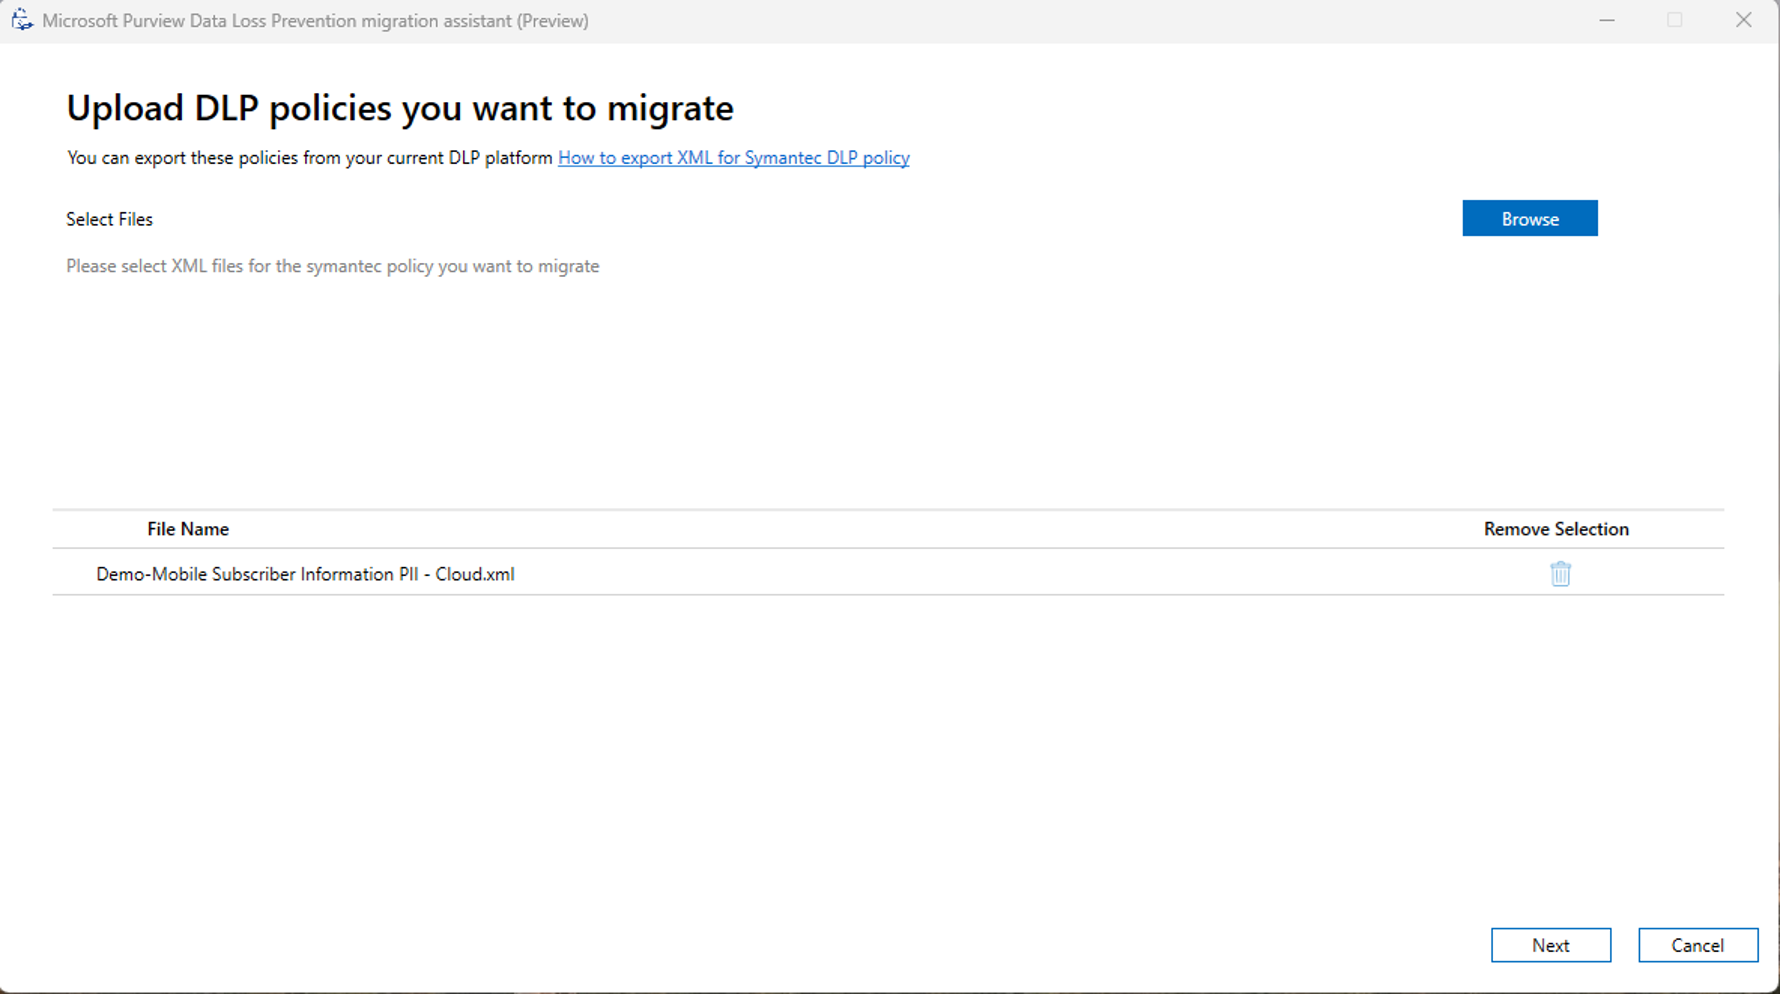 Screenshot of uploading DLP Policies to migrate.